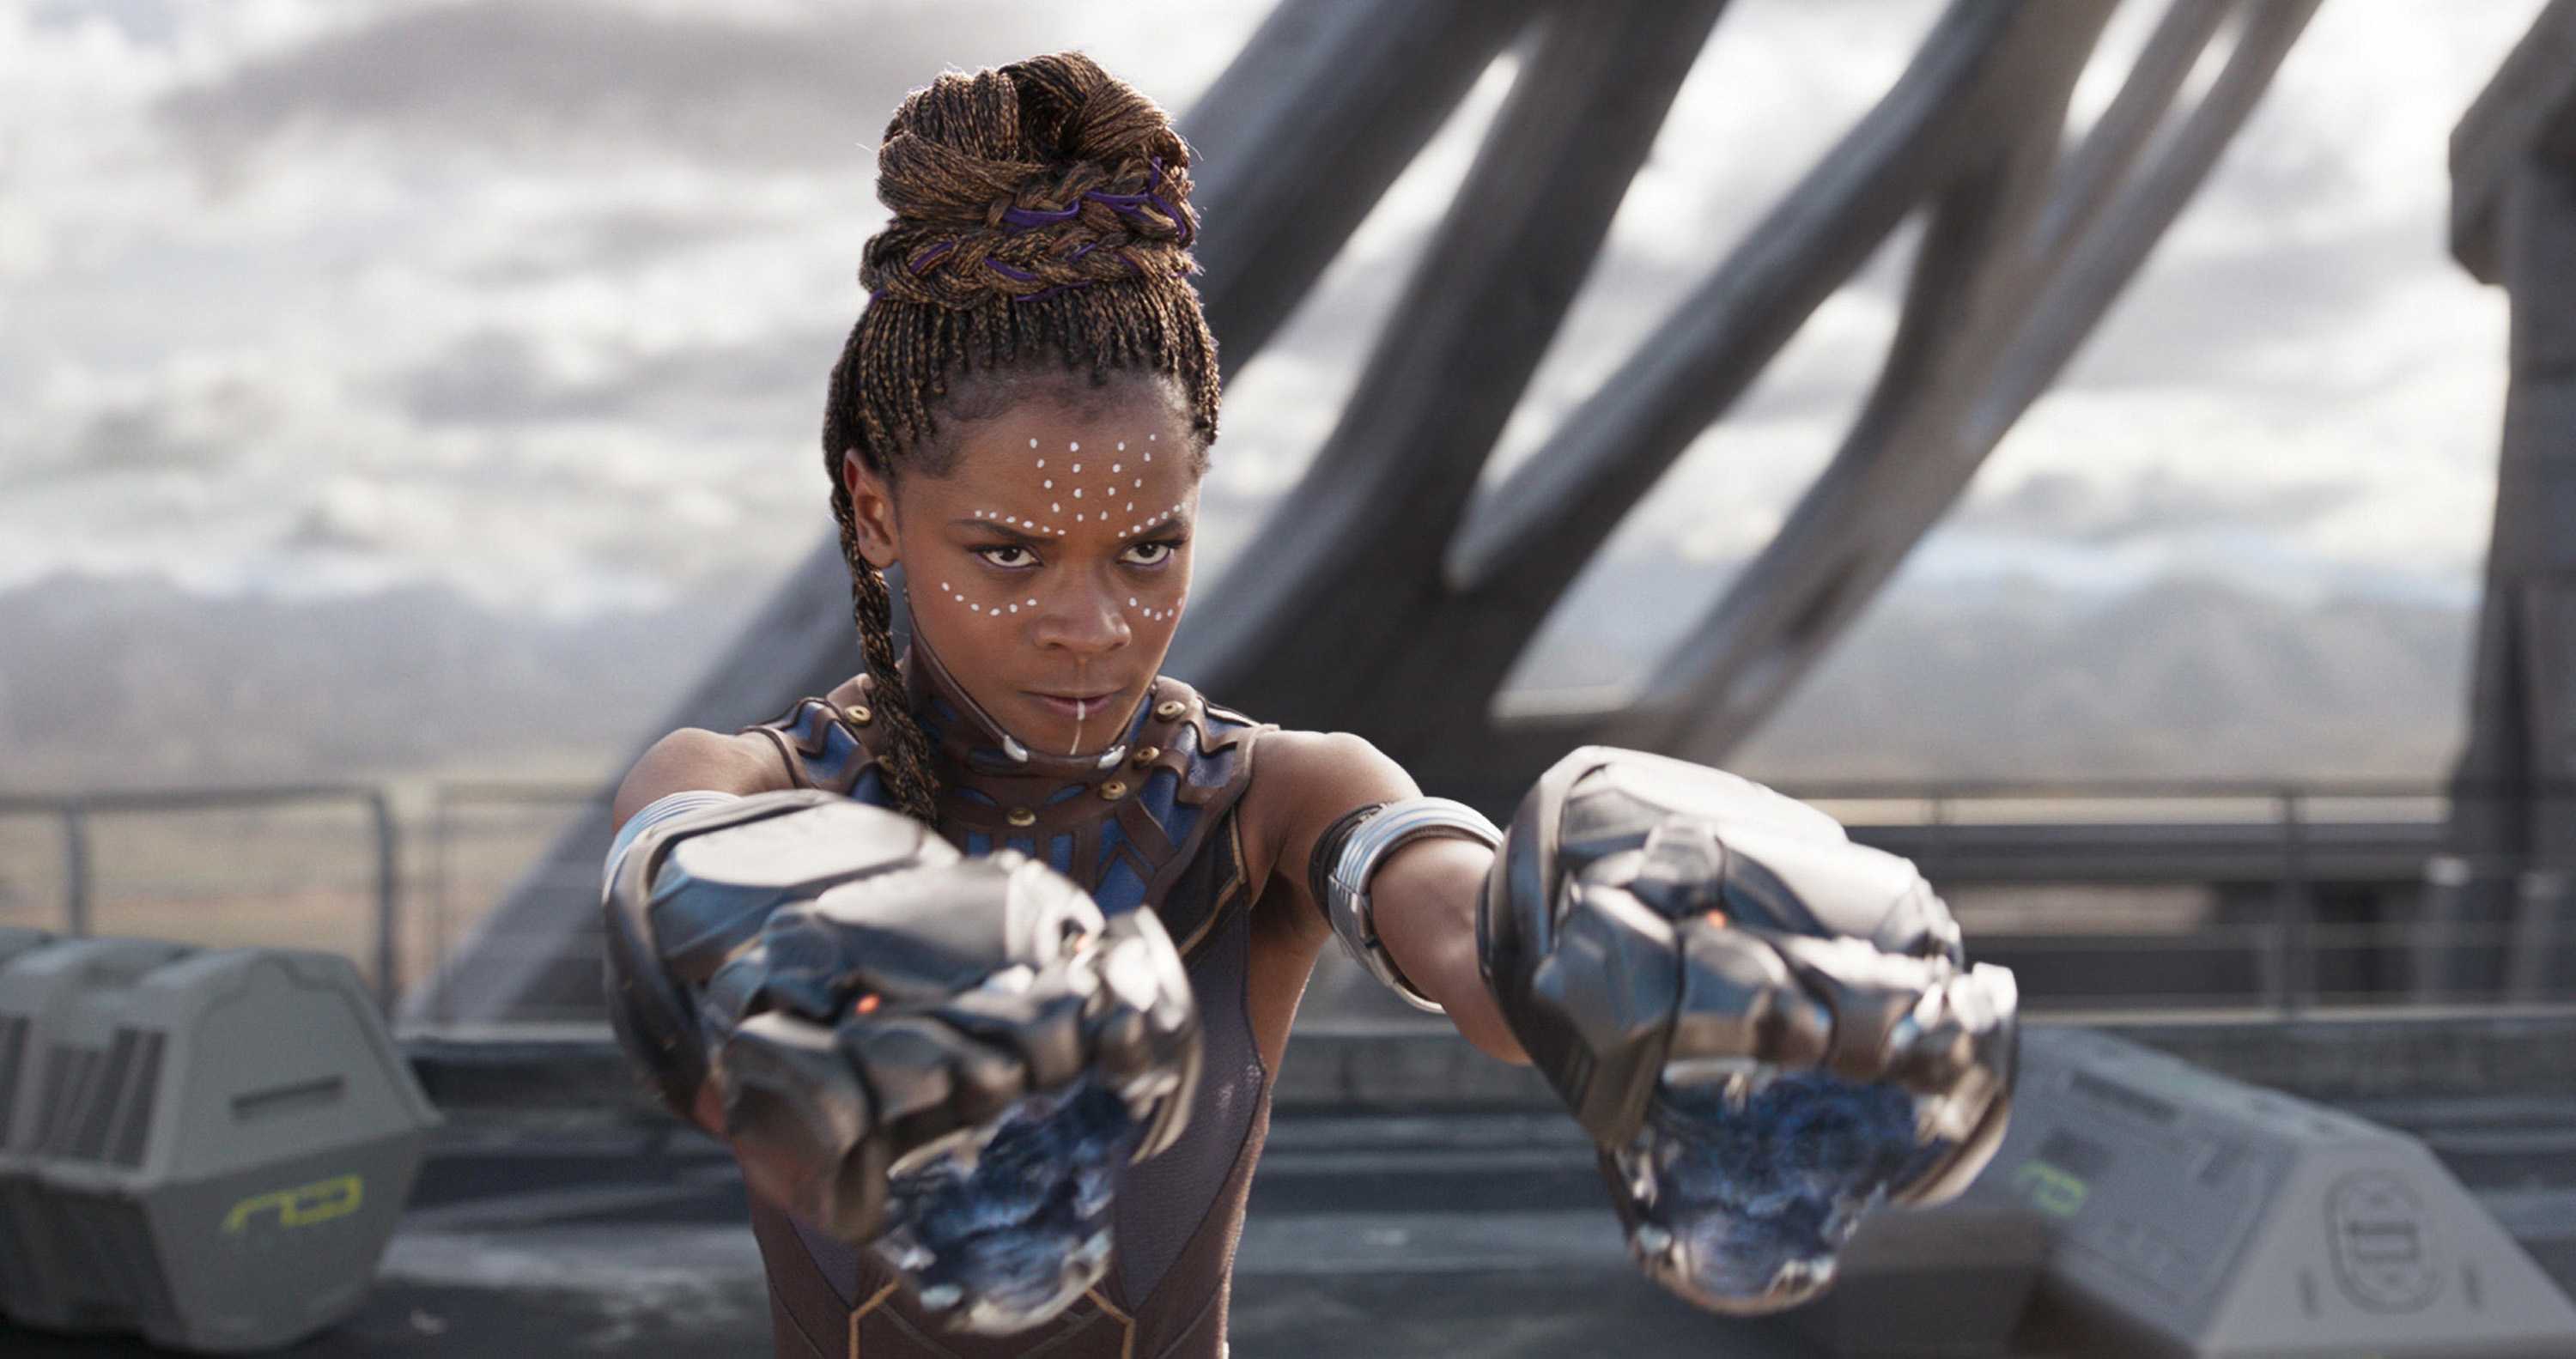 Shuri is fighting with her Vibranium Gauntlets. She is focused and determined and holding her arms out straight.